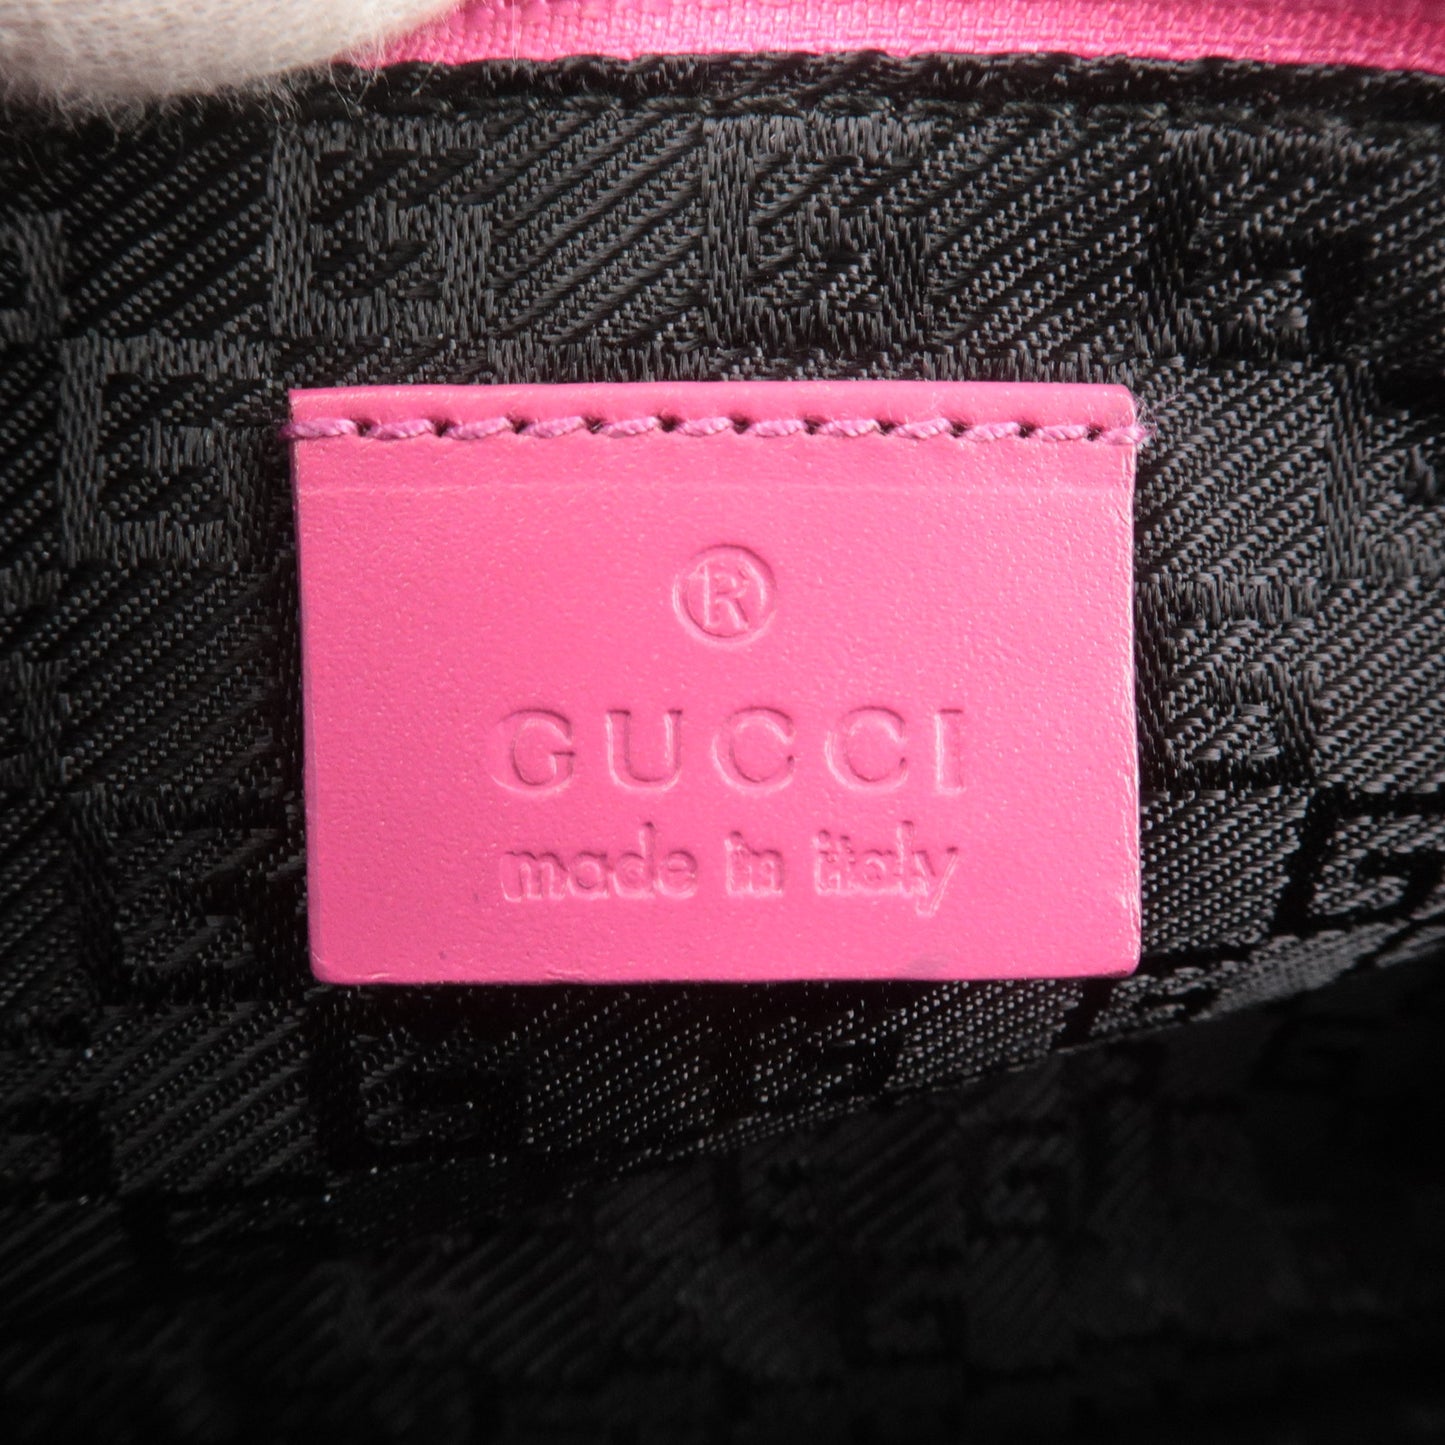 GUCCI Boat Bag Satin Leather Pouch Hand Bag Pink 039.1103